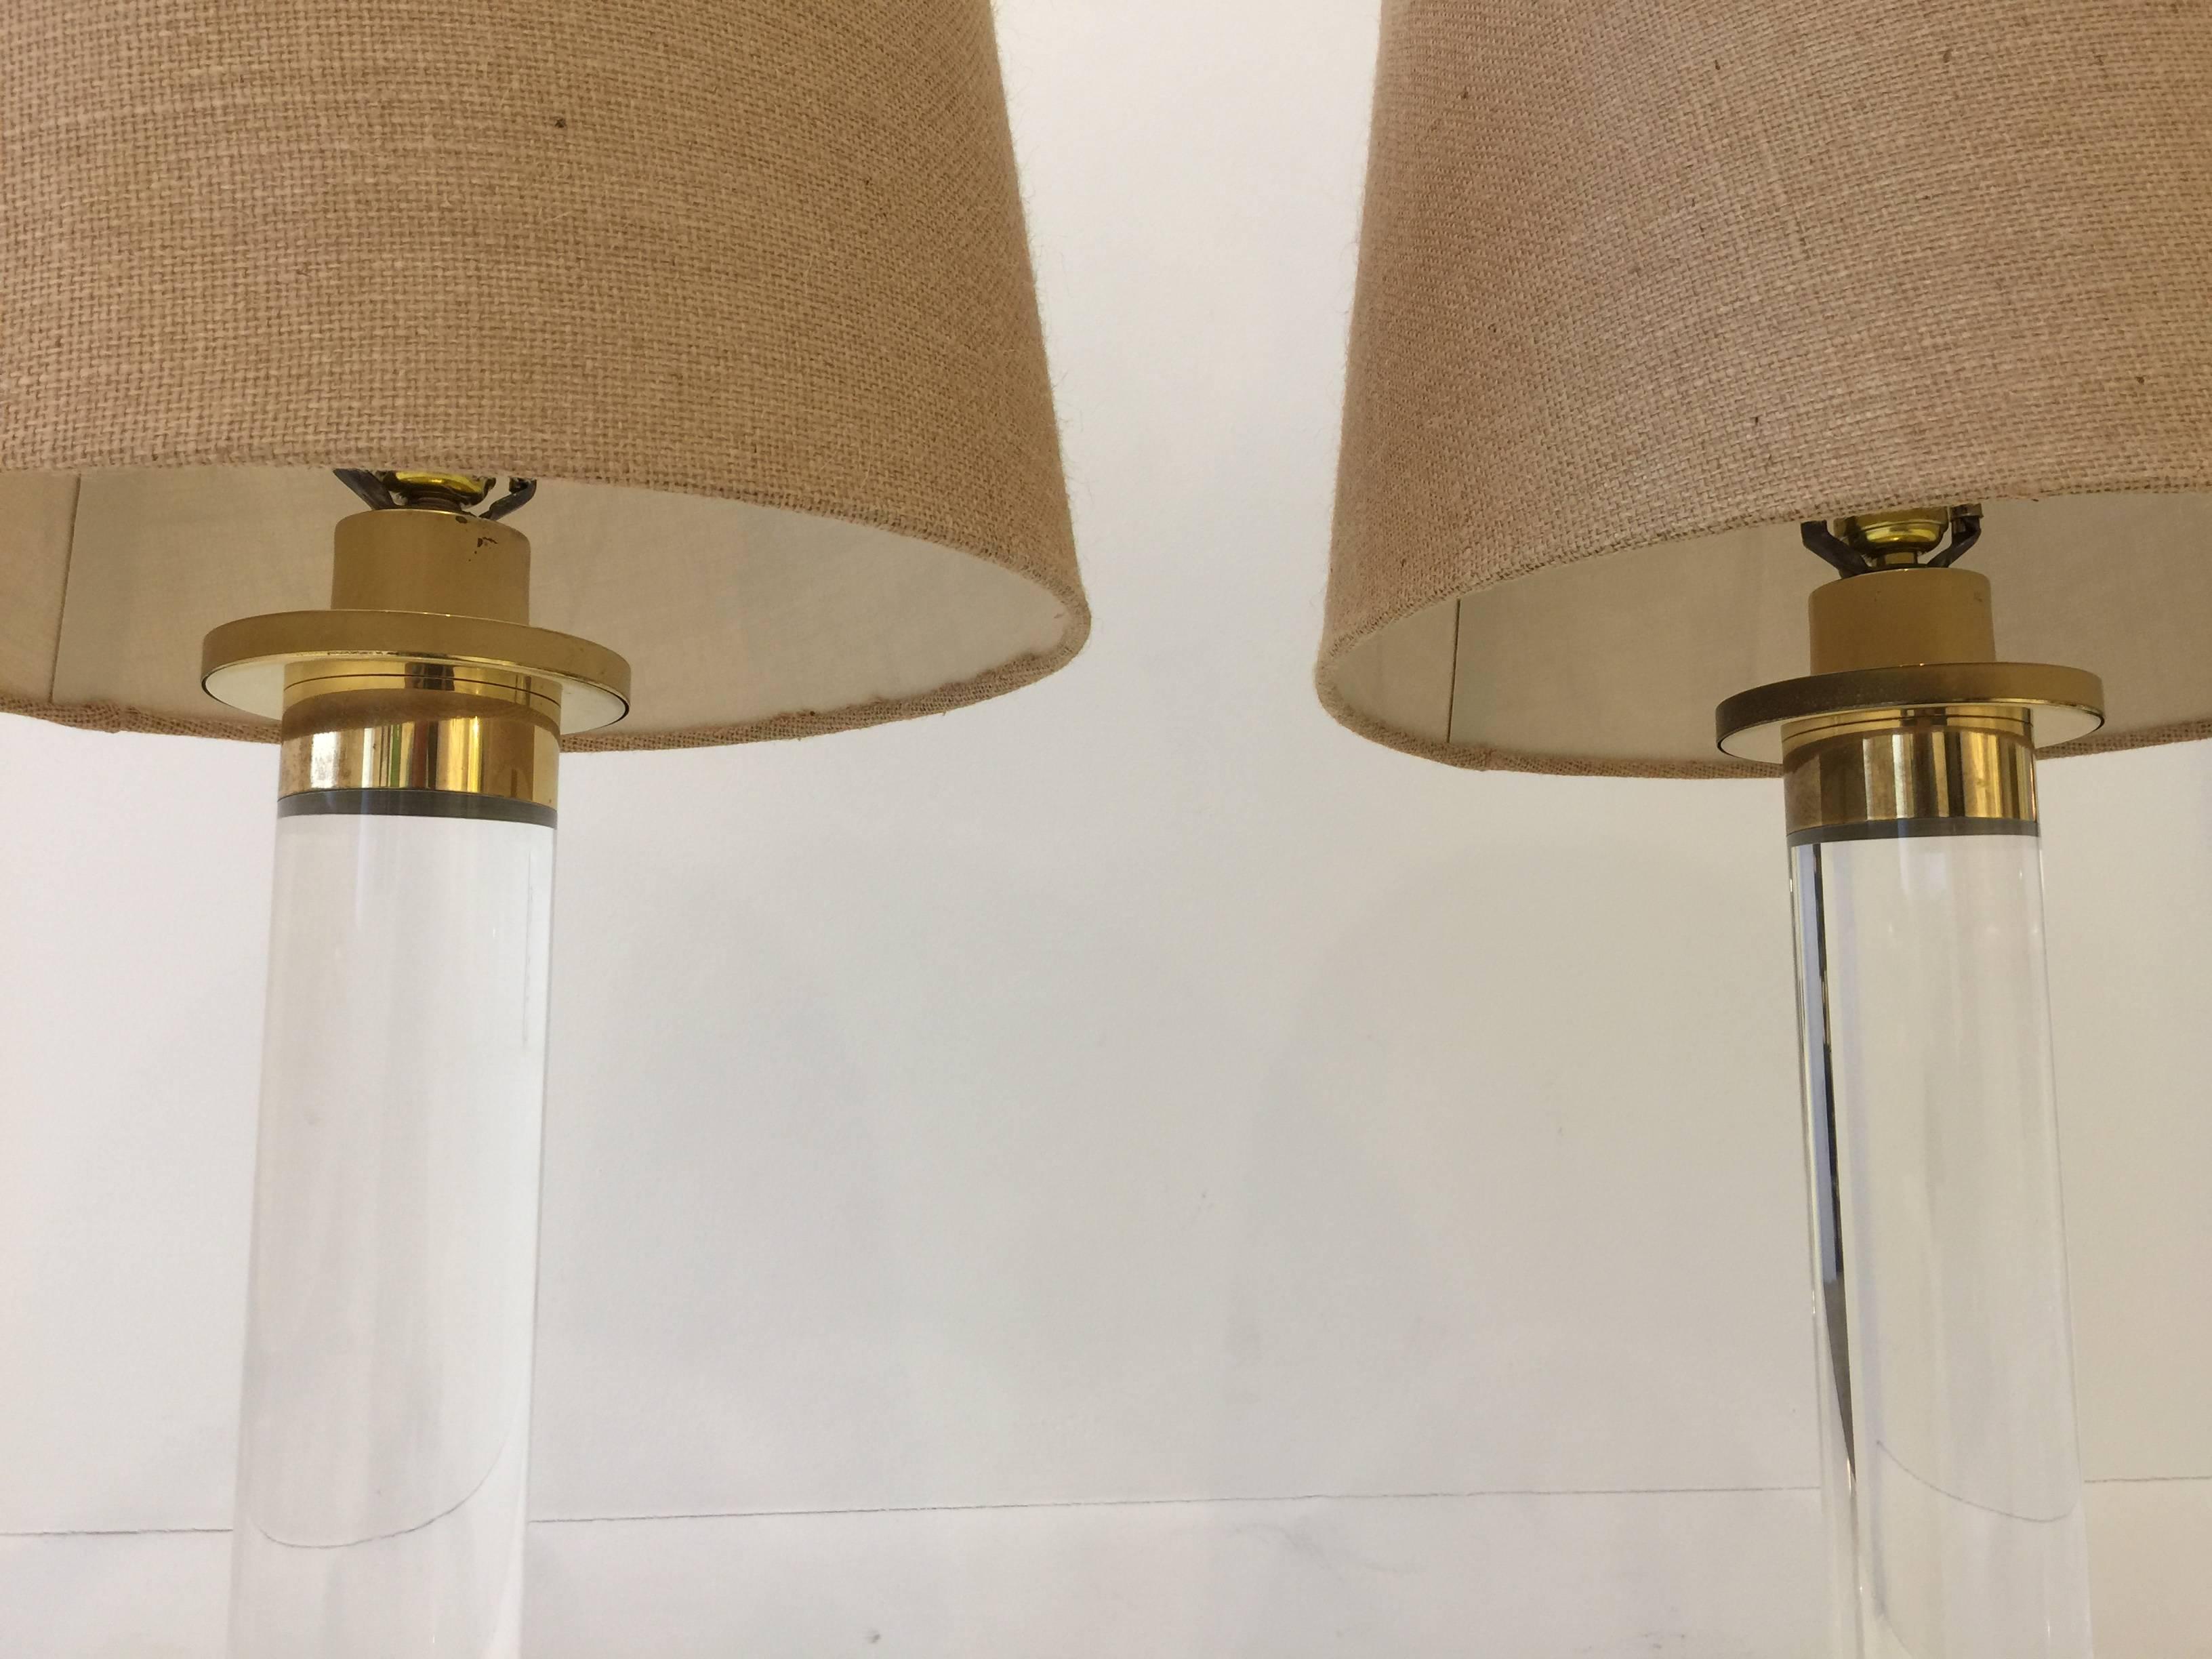 Very stylish Lucite cylinder table lamps with brass accents. shades are Not included.